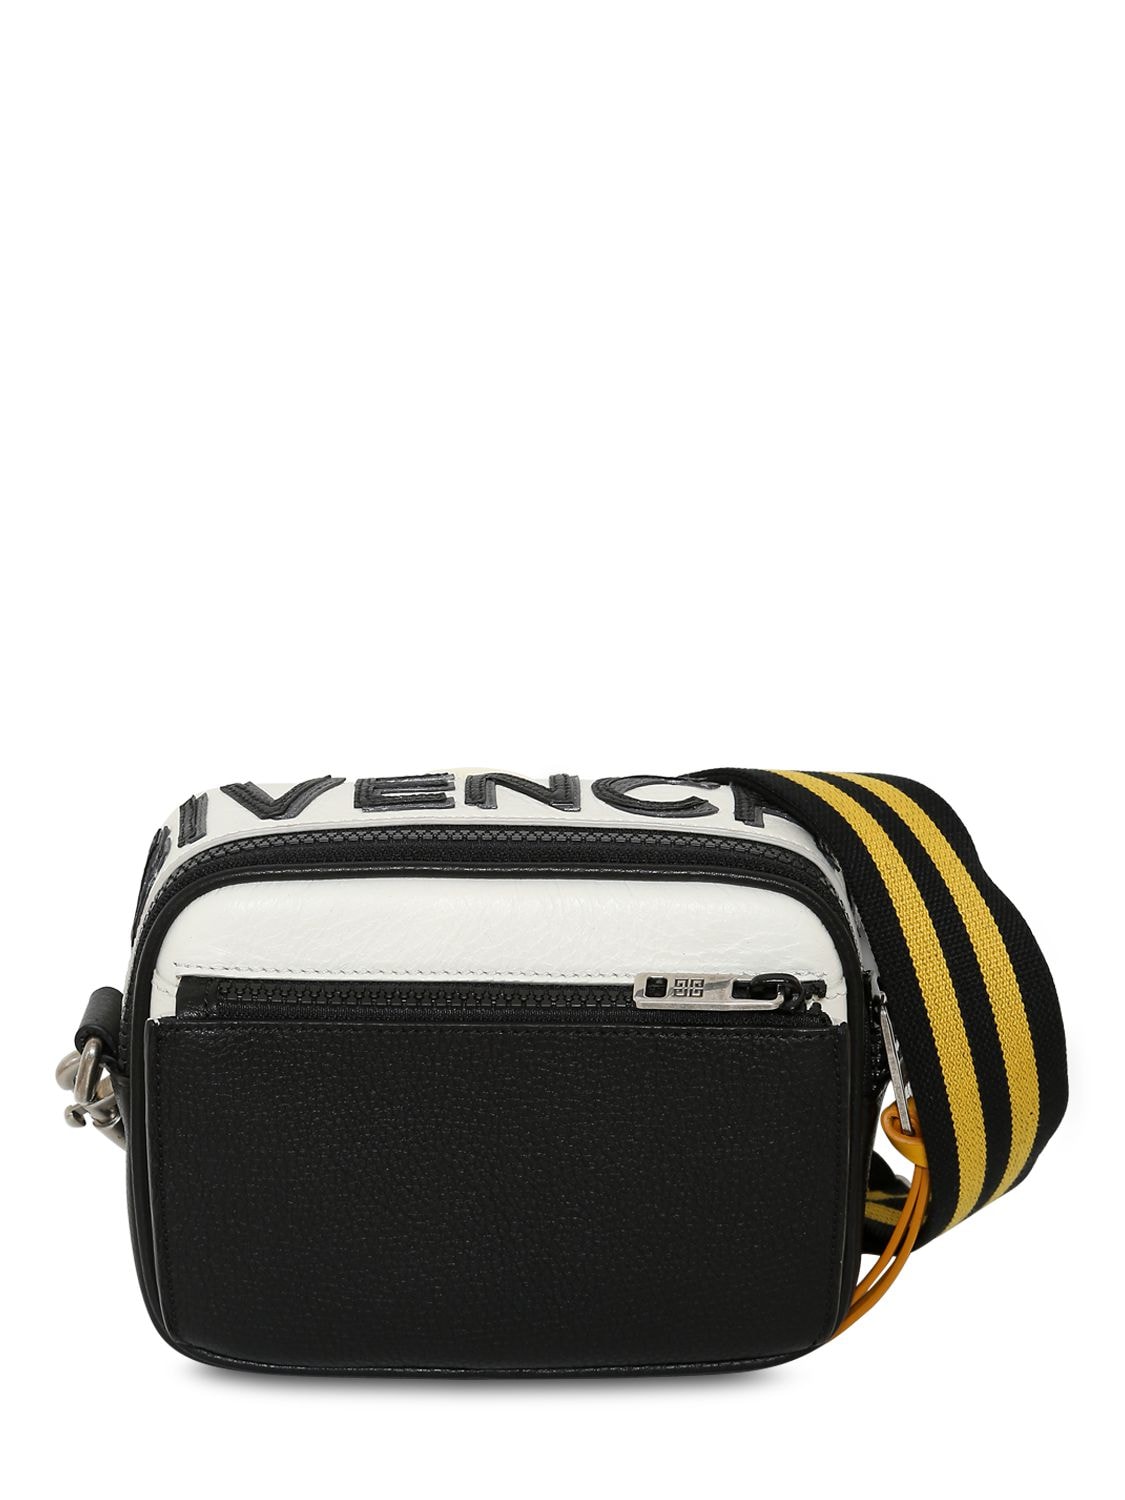 GIVENCHY REVERSIBLE LOGO LEATHER CROSSBODY BAG,69IL4G007-MDAZ0